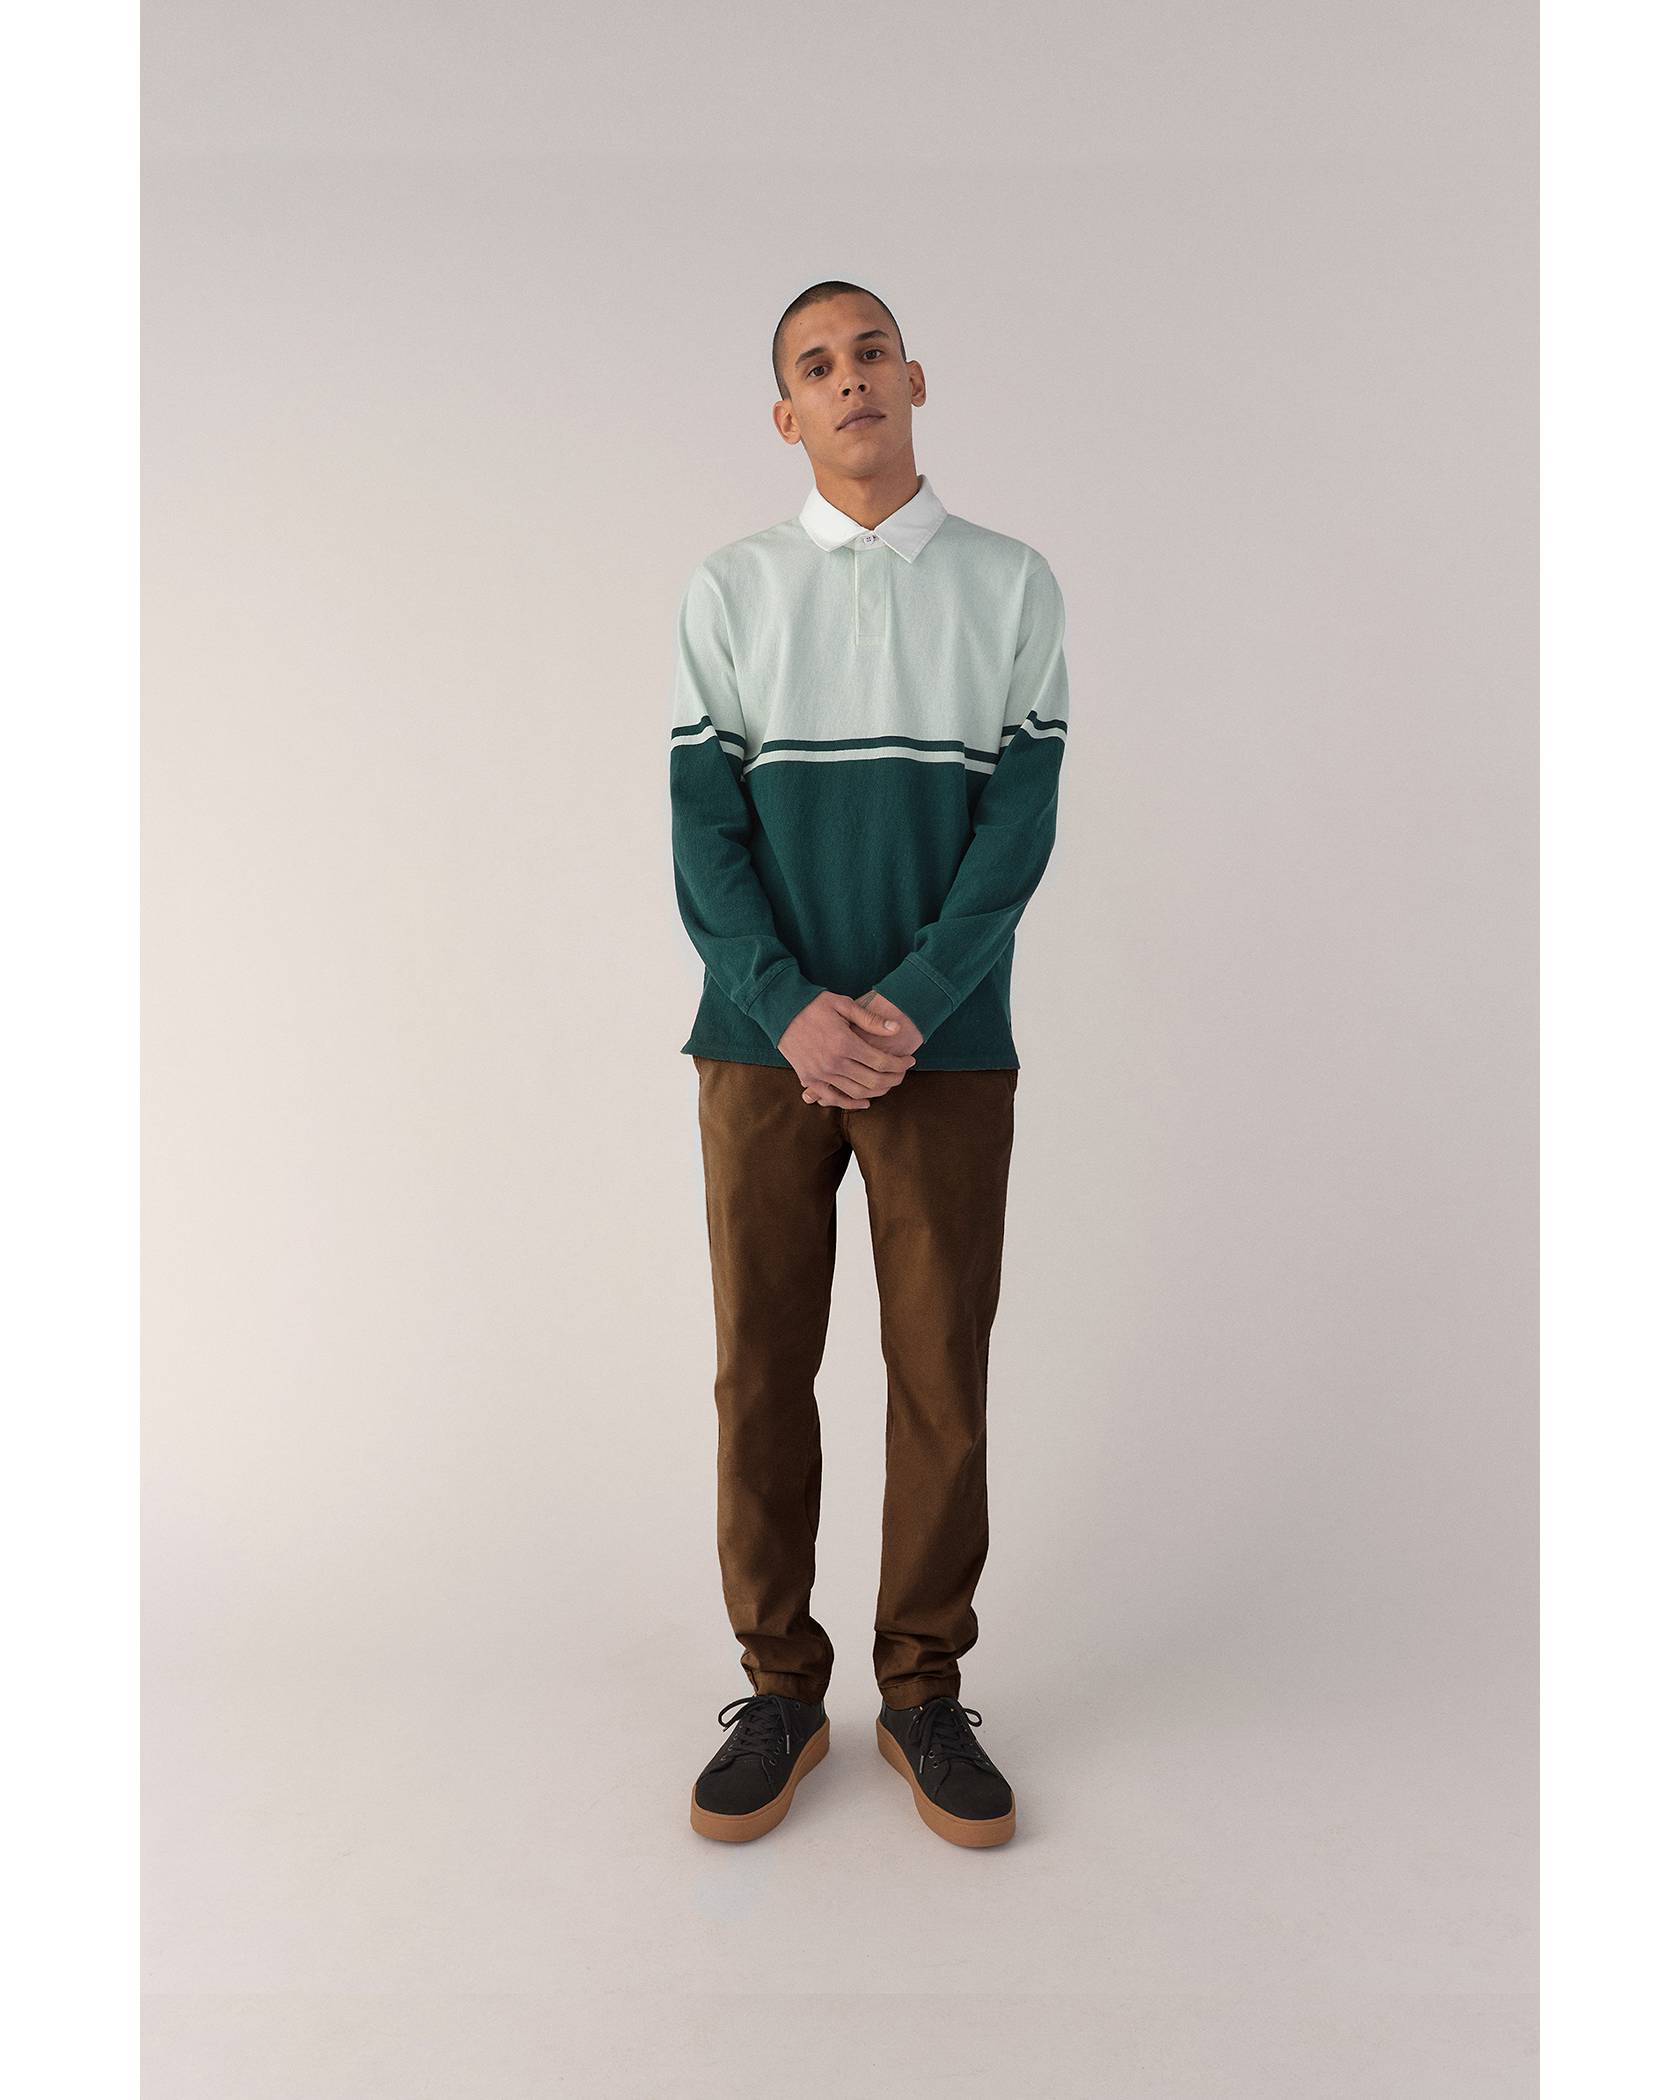 Model wearing mint and dark green collared shirt, brown pants, and black sneakers